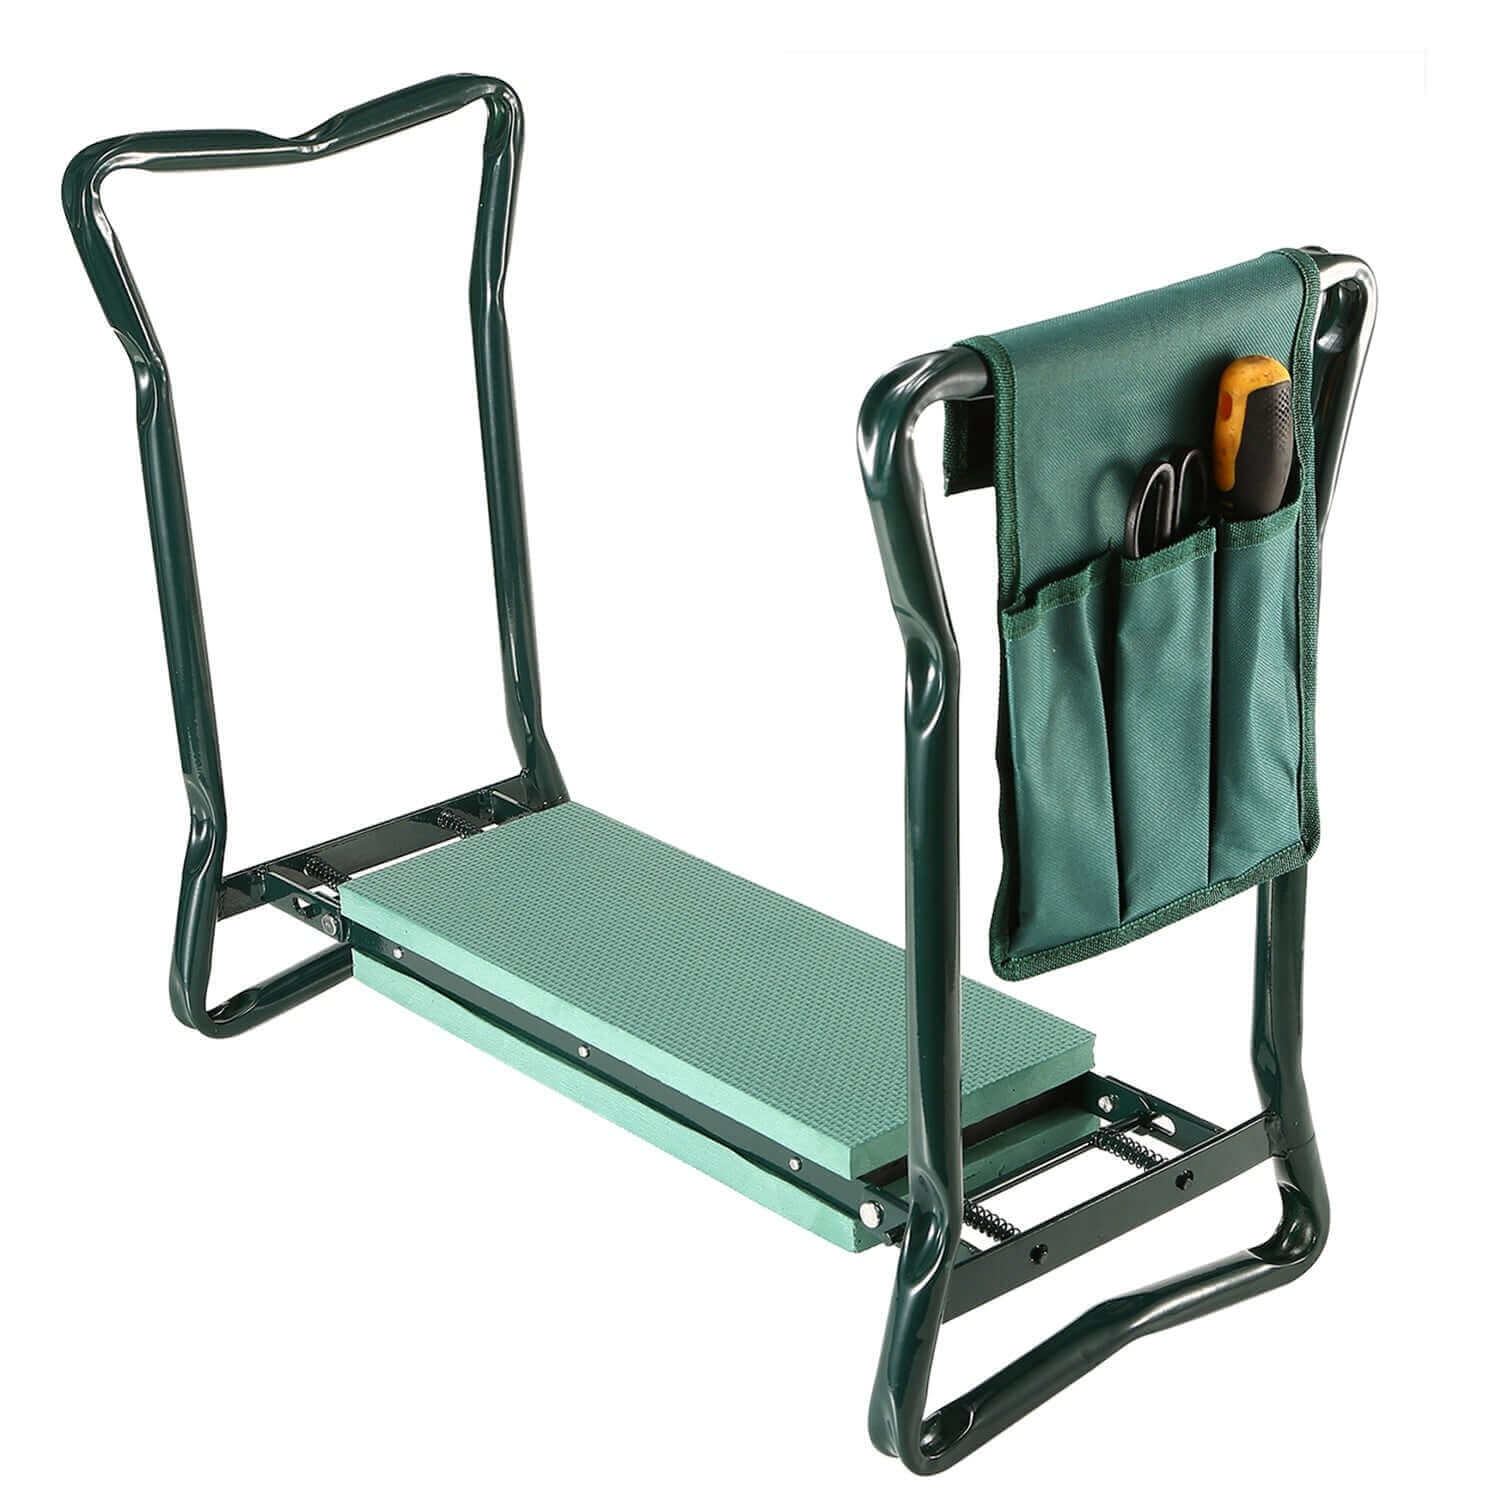 Foldable Garden Kneeler and Seat - 6